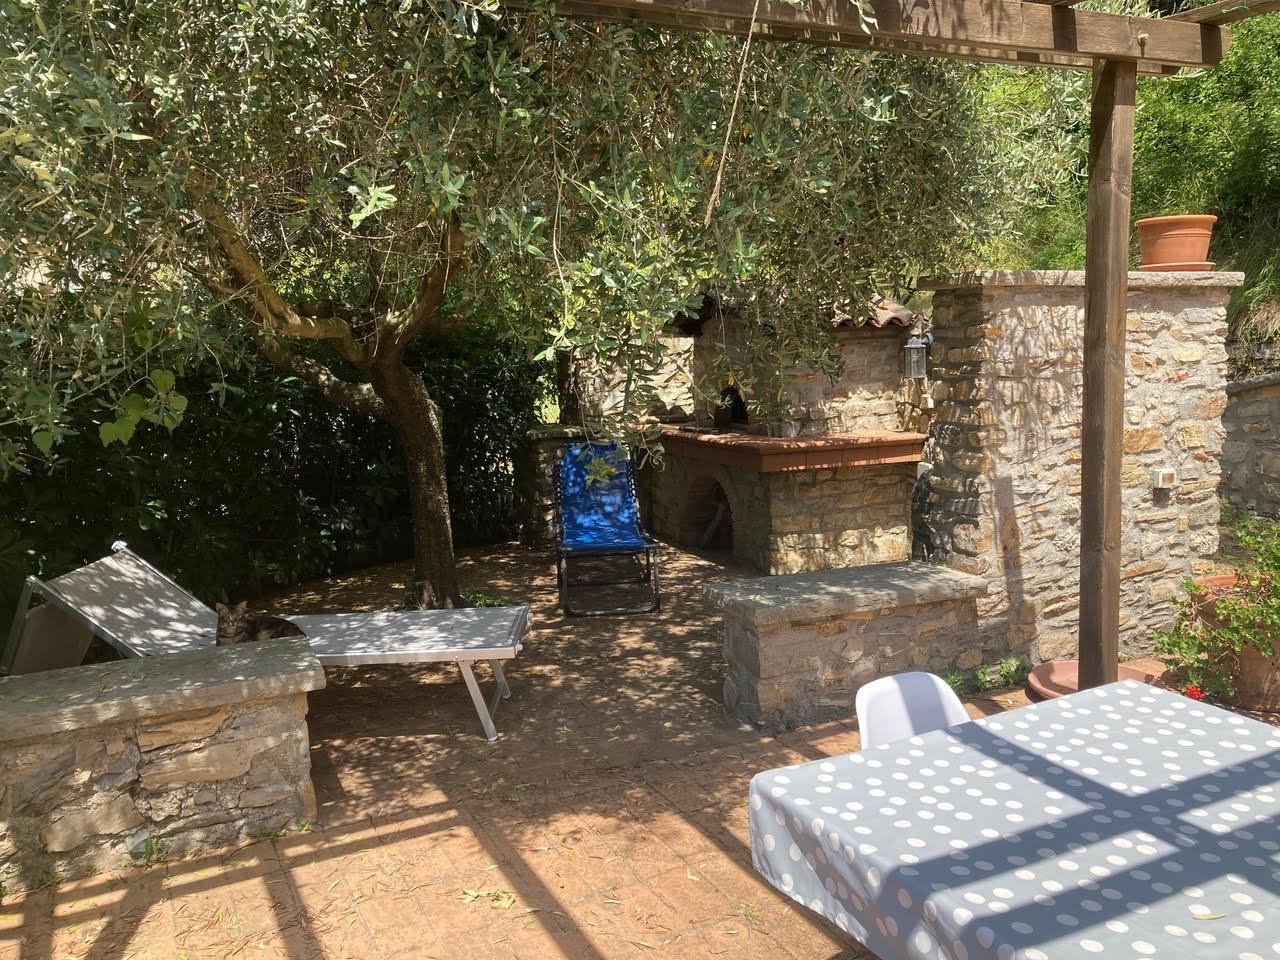 sits in the shade of a large olive tree - the perfect place for a quiet, post-prandial snooze